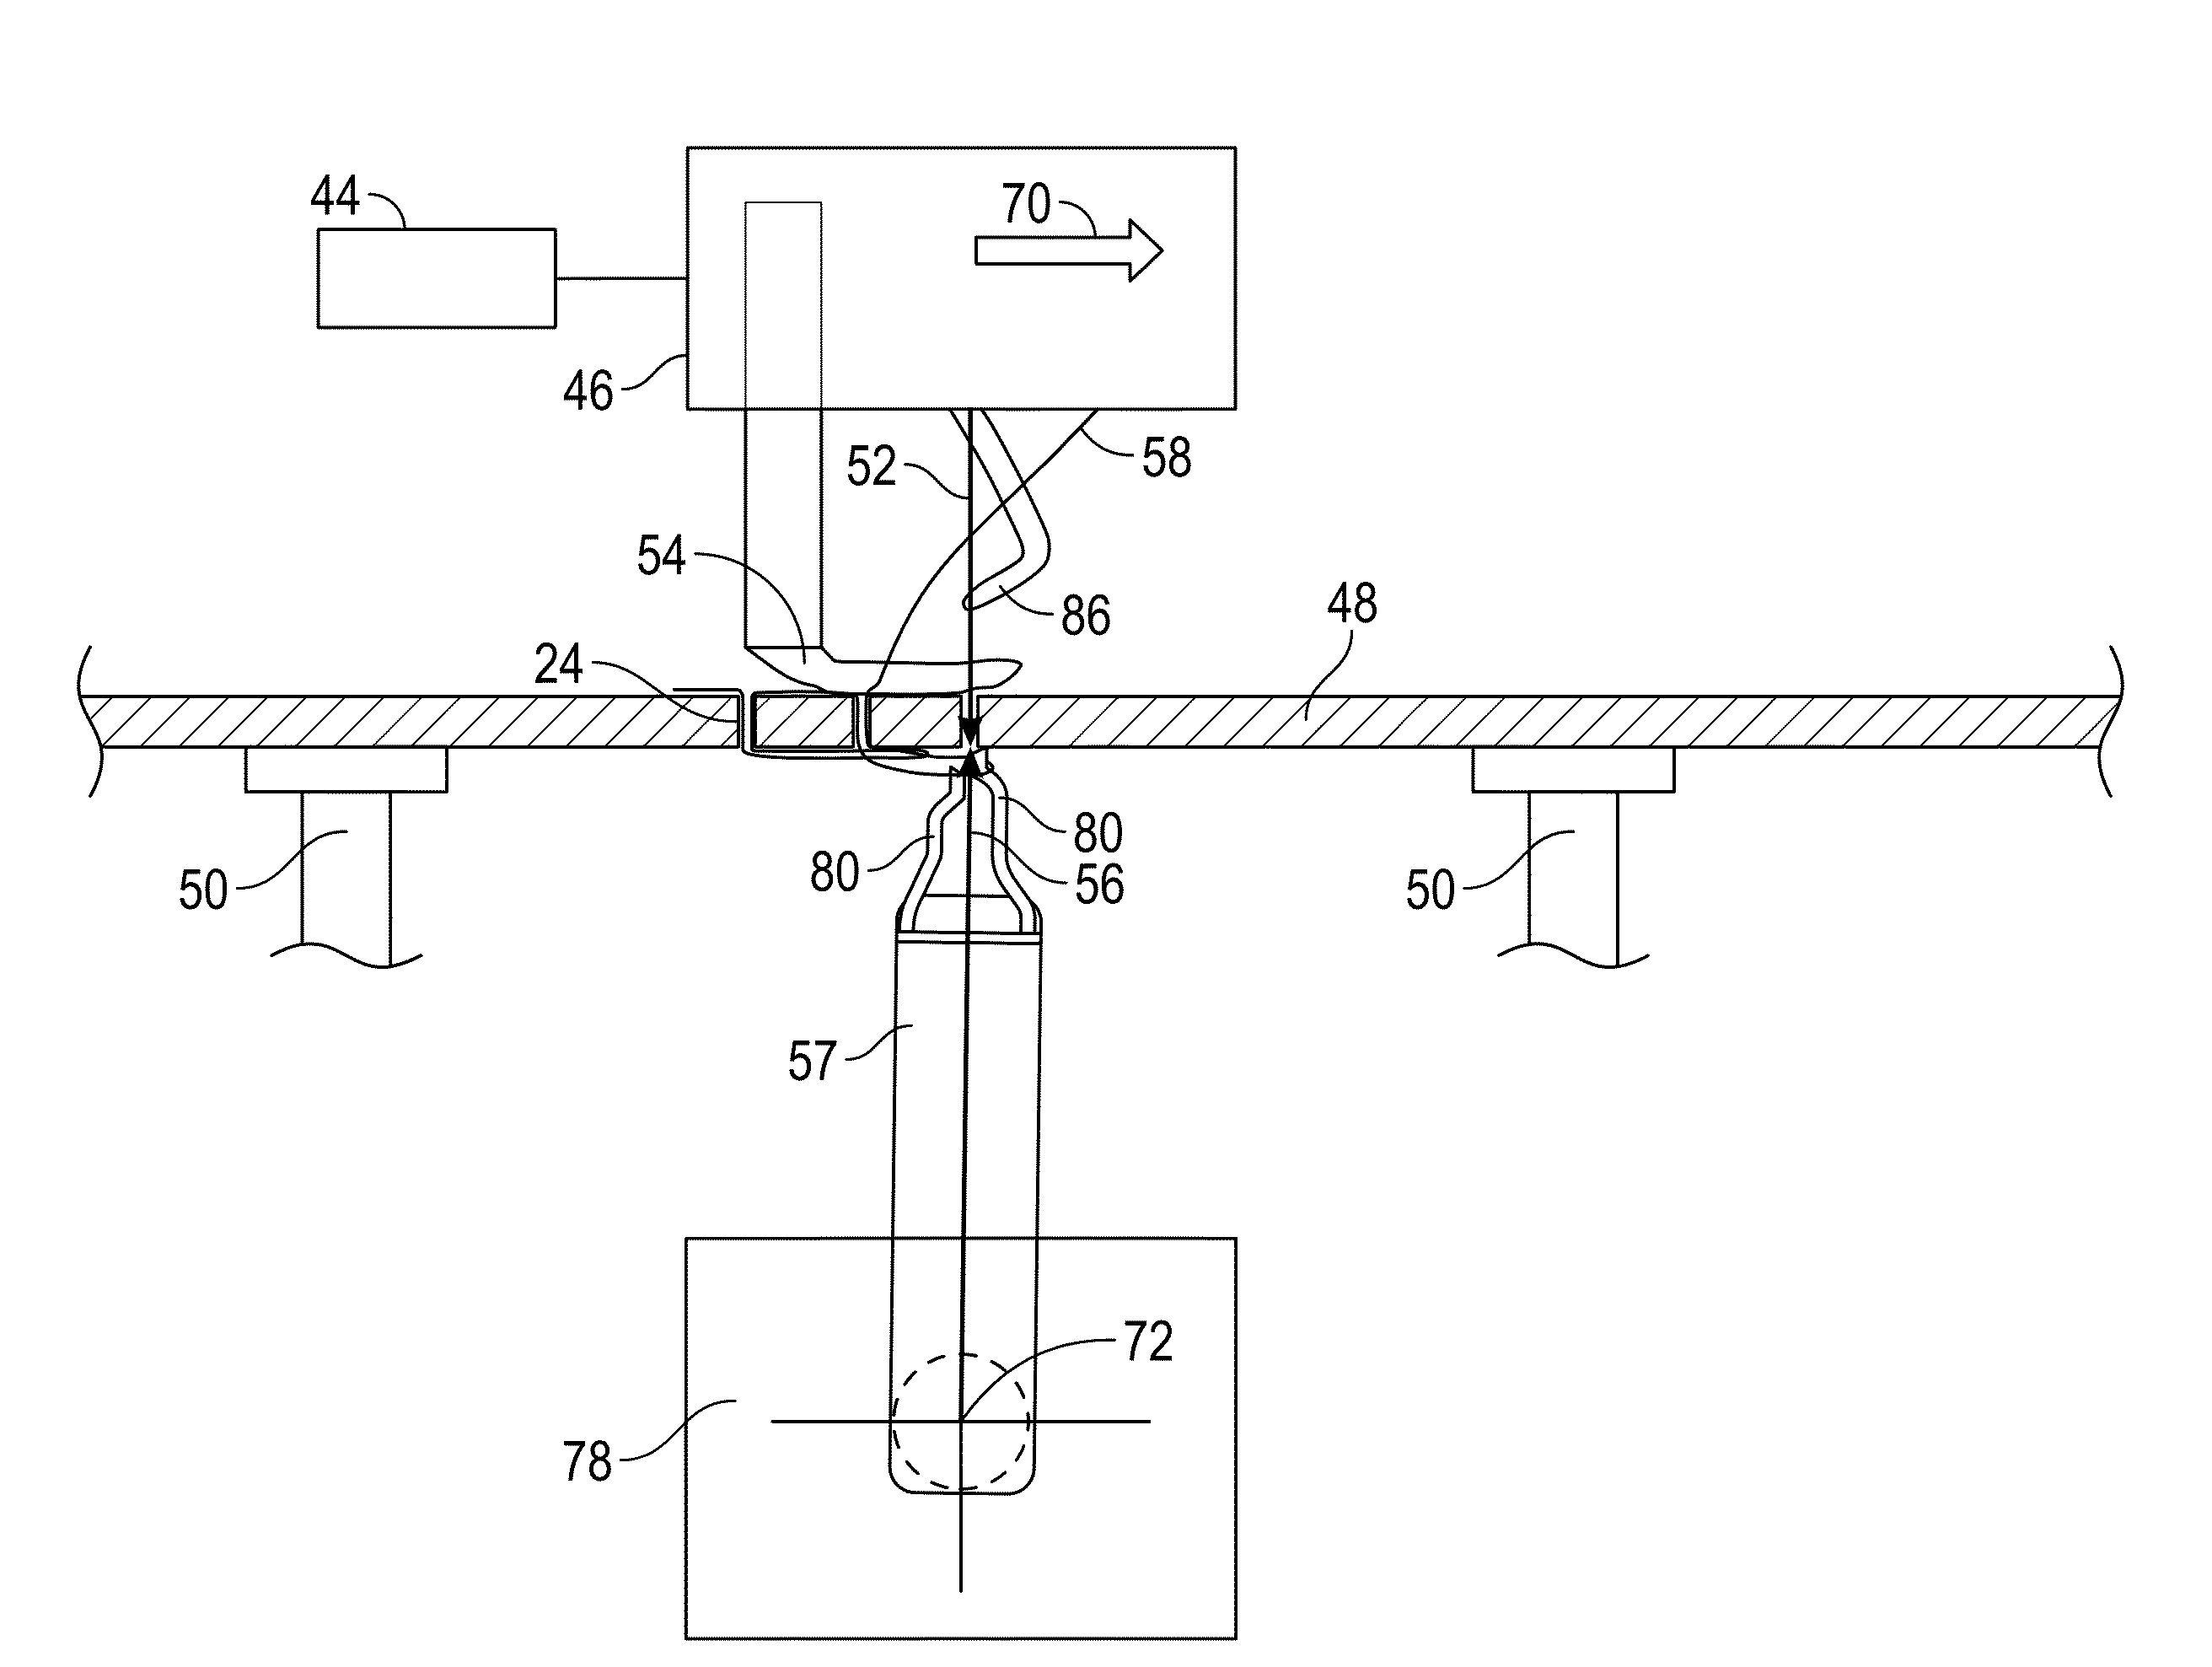 Apparatus and methods for stitching vehicle interior components and components formed from the methods